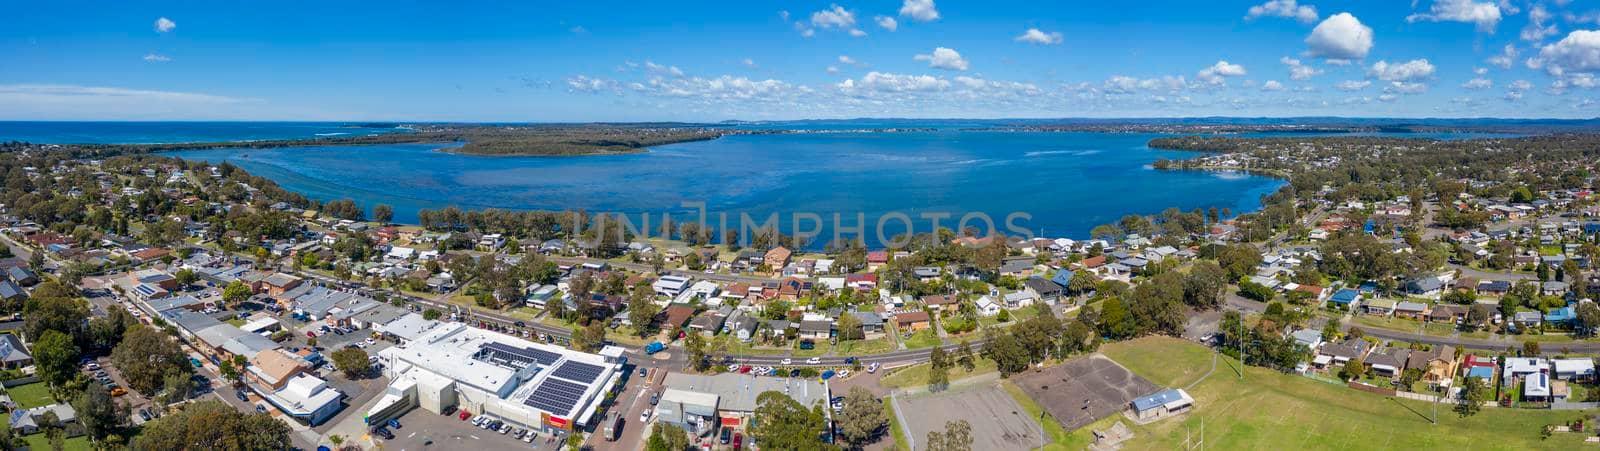 Aerial view of the township of Budgewoi in regional Australia by WittkePhotos